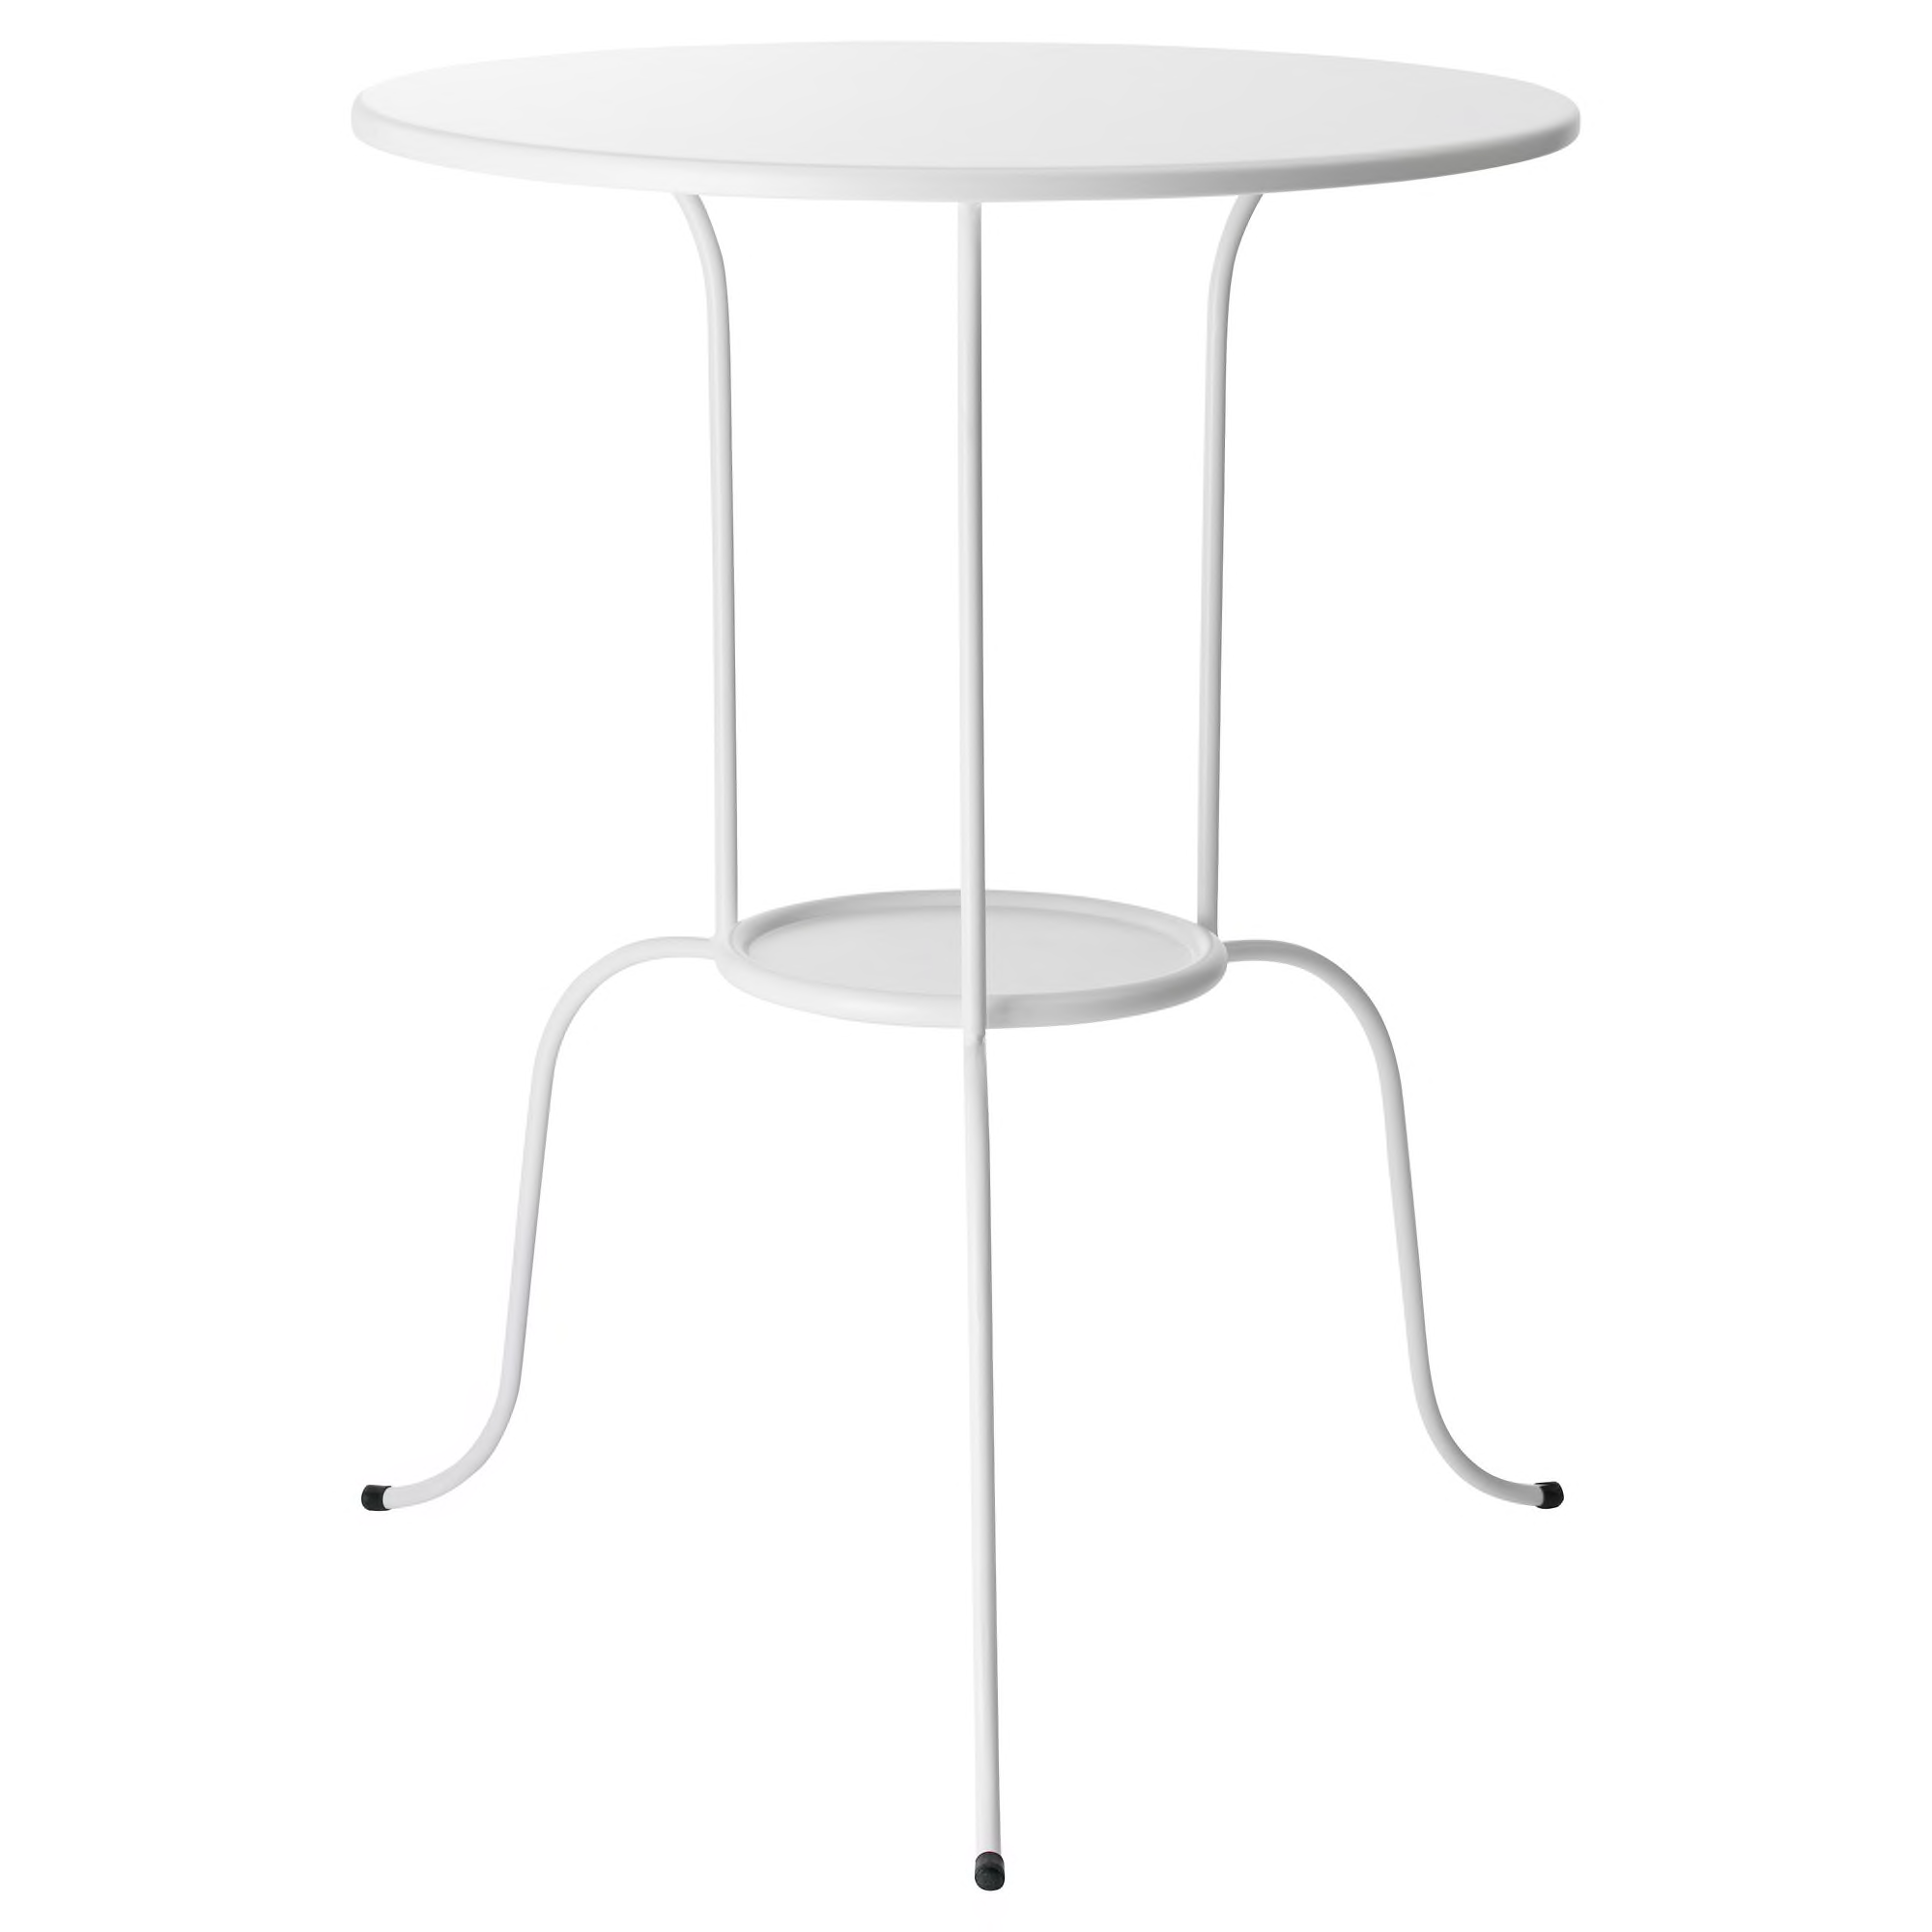 lindved side table ikea small accent farmhouse trestle large circular tablecloths uttermost furniture end tables hollywood mirrored one door cabinet round glass top tall slim